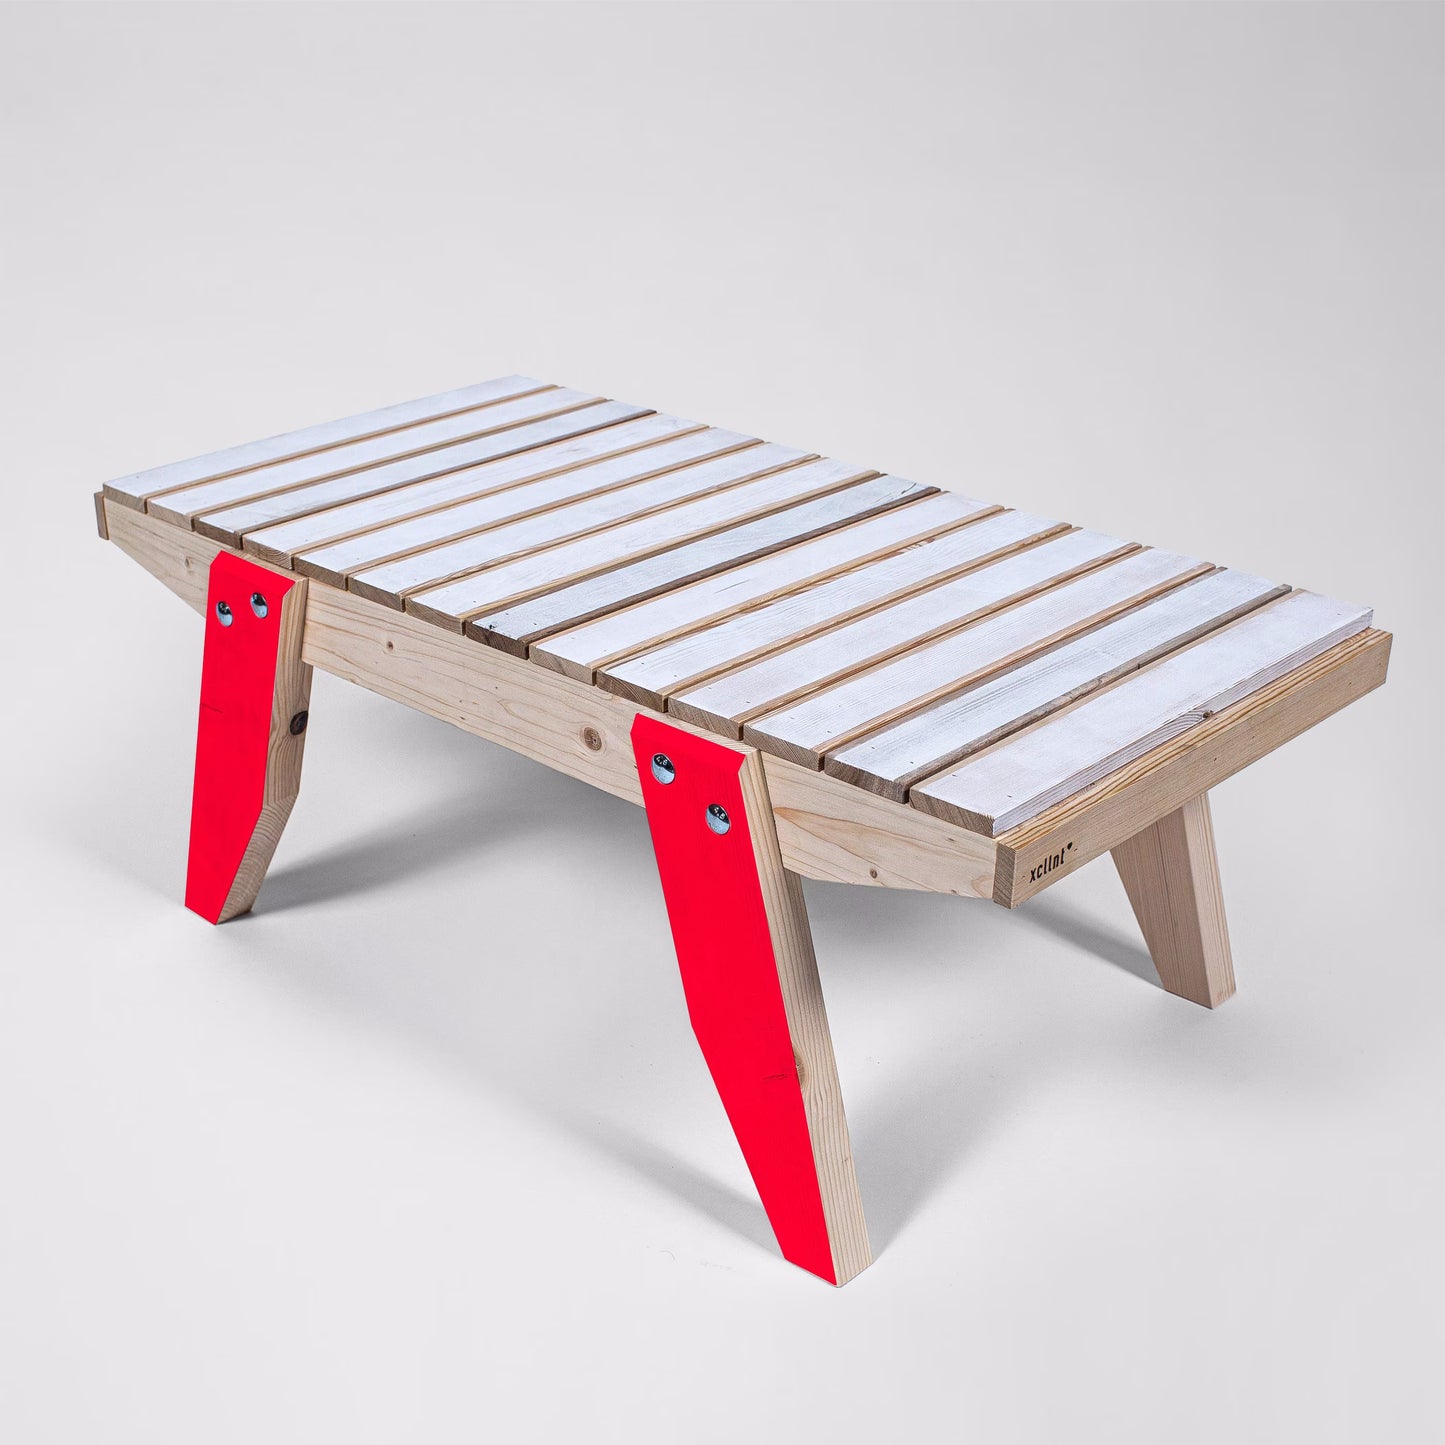 Maantis - Upcycling side table made of wood in the colors natural, white and neon red